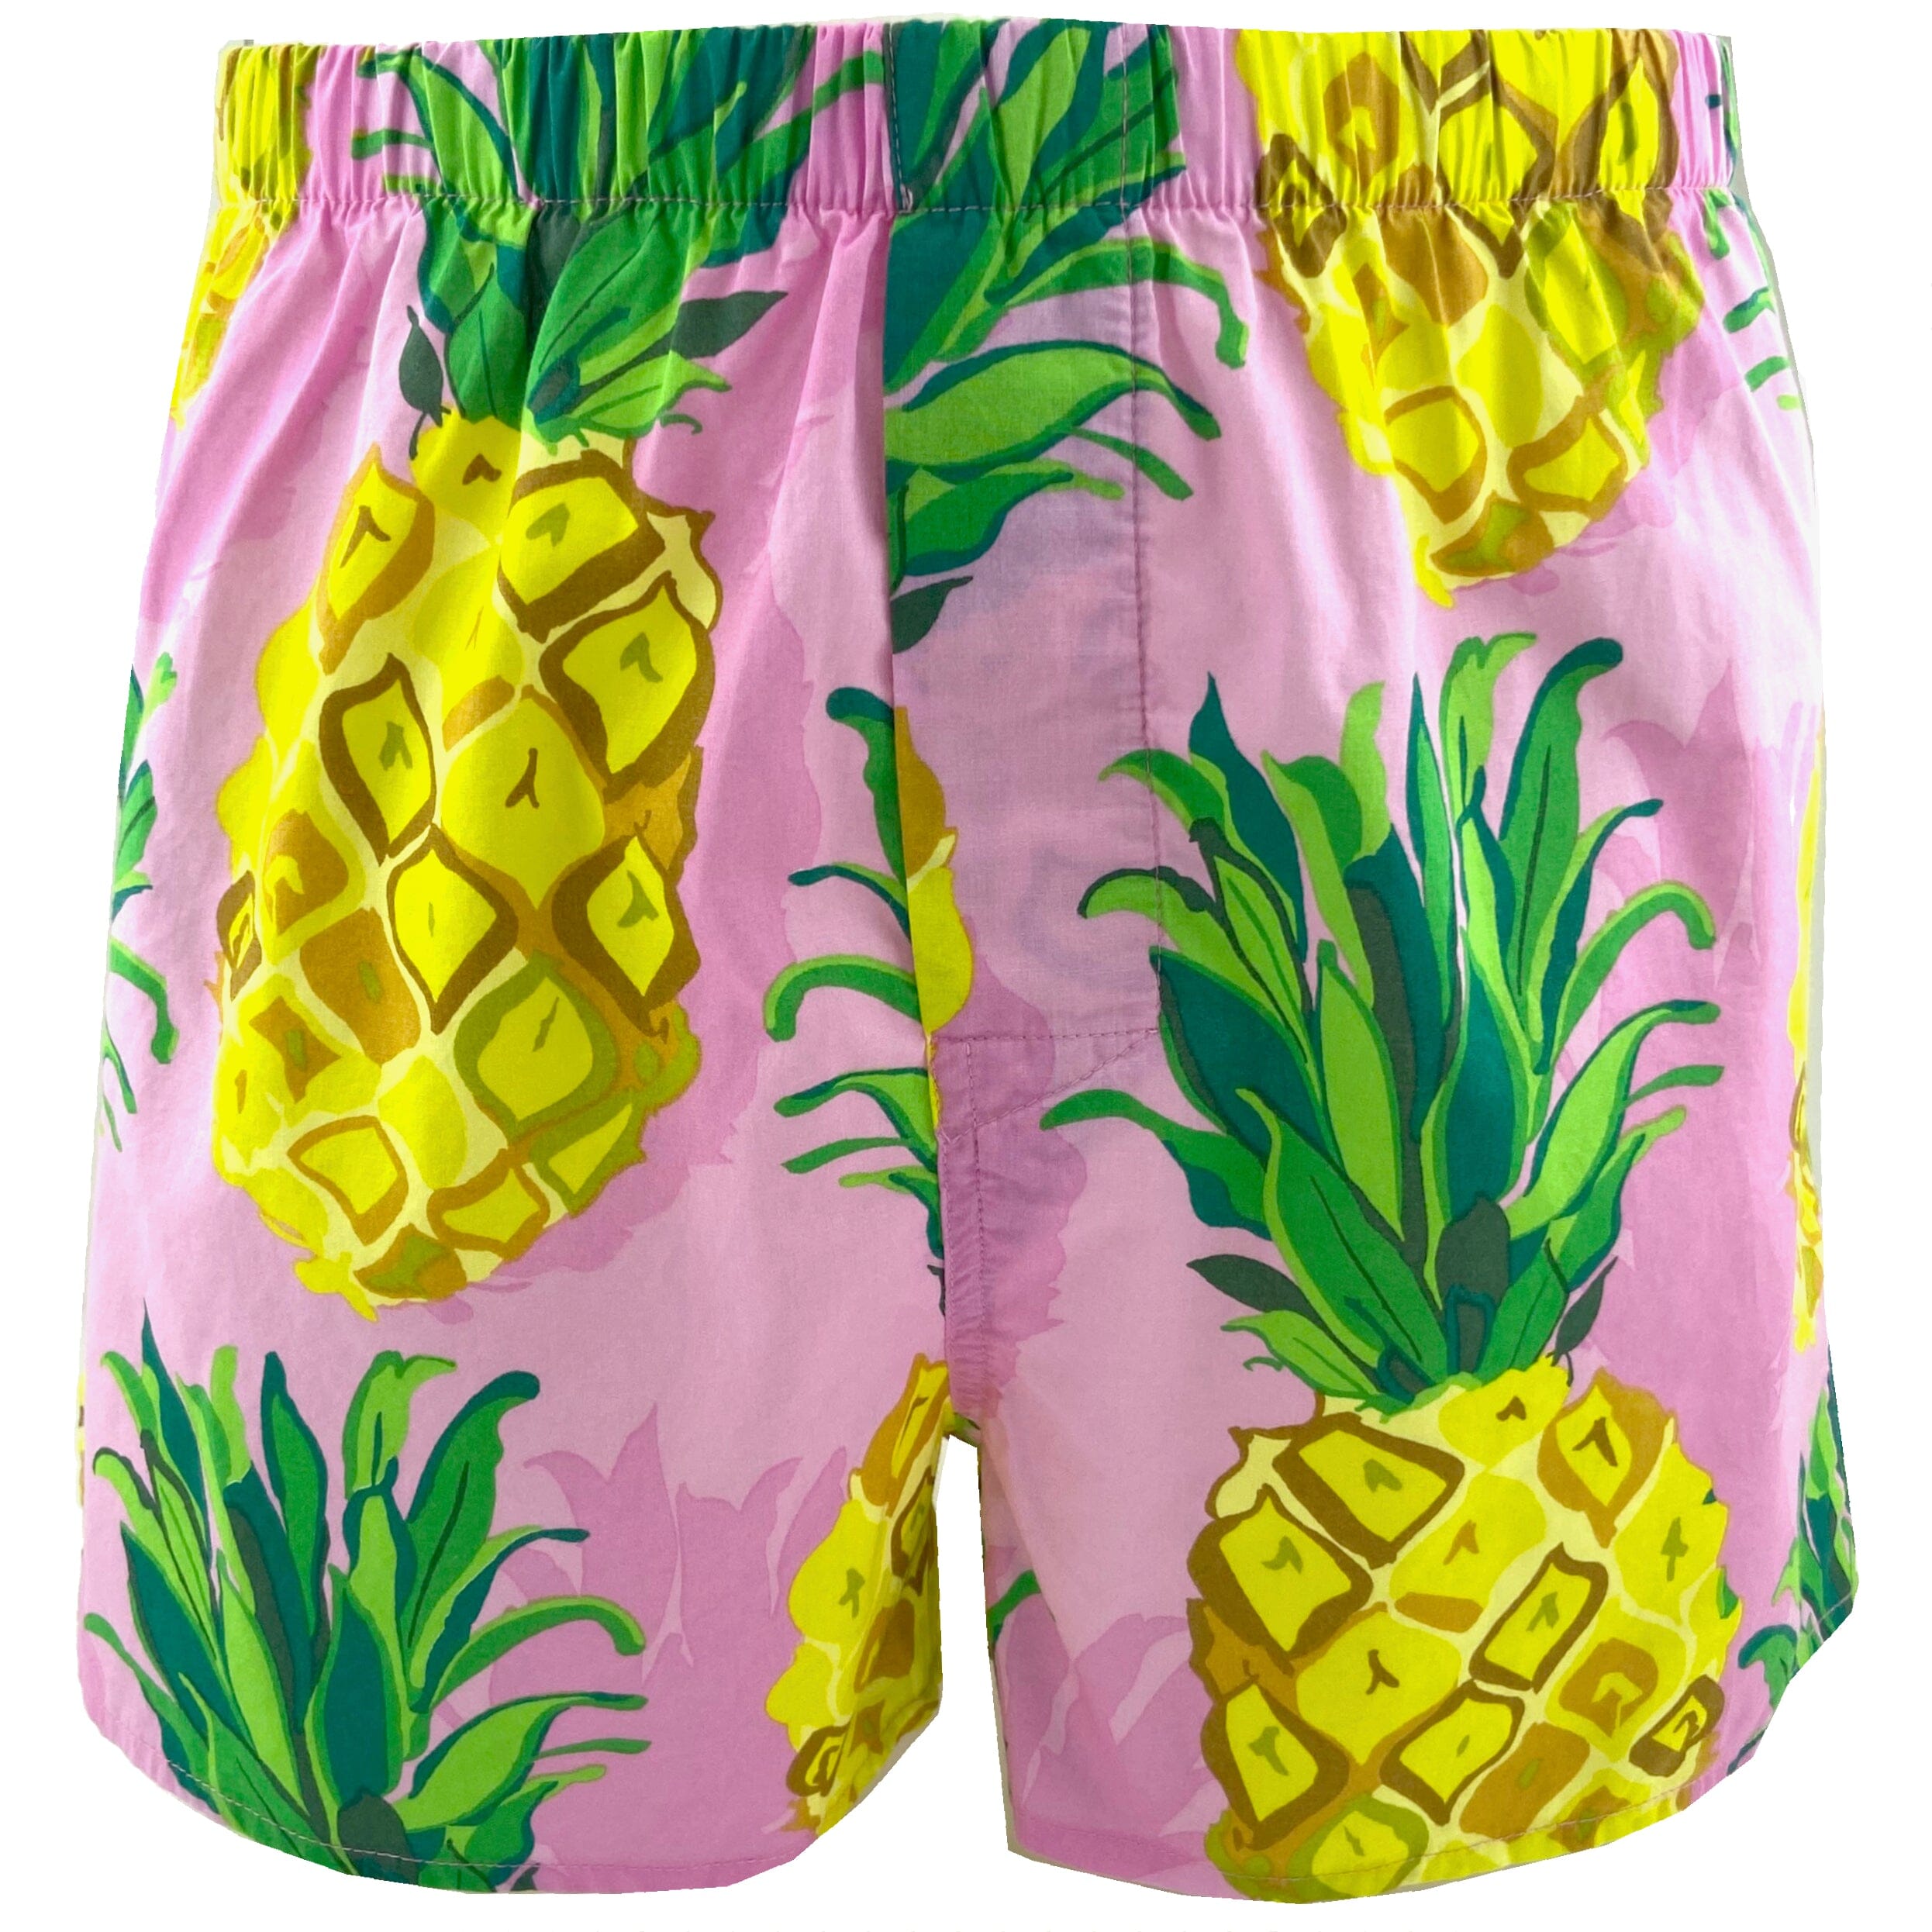 Bright Pink Tropical Fruity Pineapple Patterned Boxer Shorts for Men